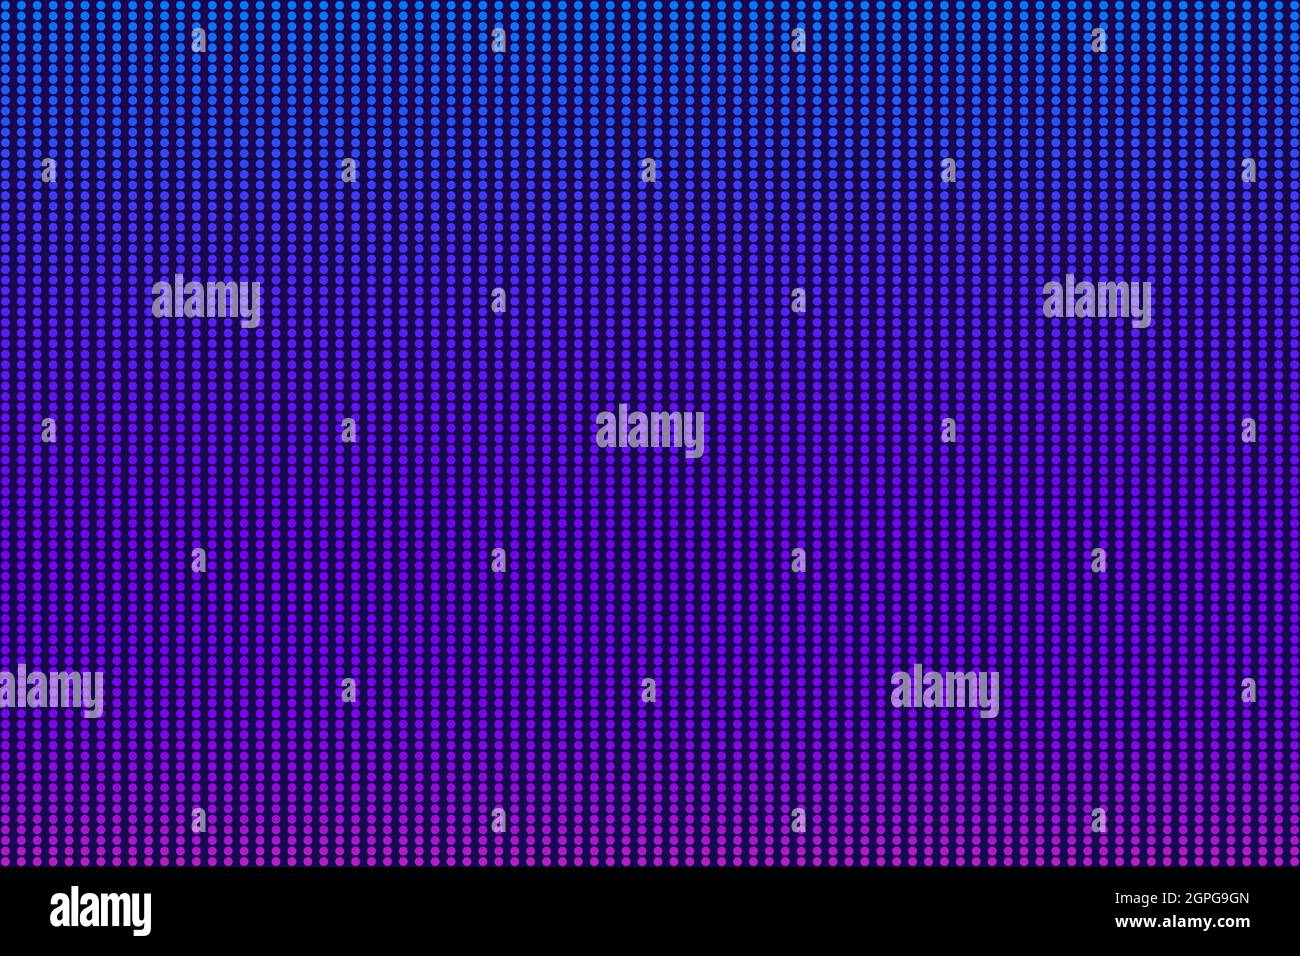 Led screen panel. Digital wall future technology vector textures light emitting diode simple background Stock Vector